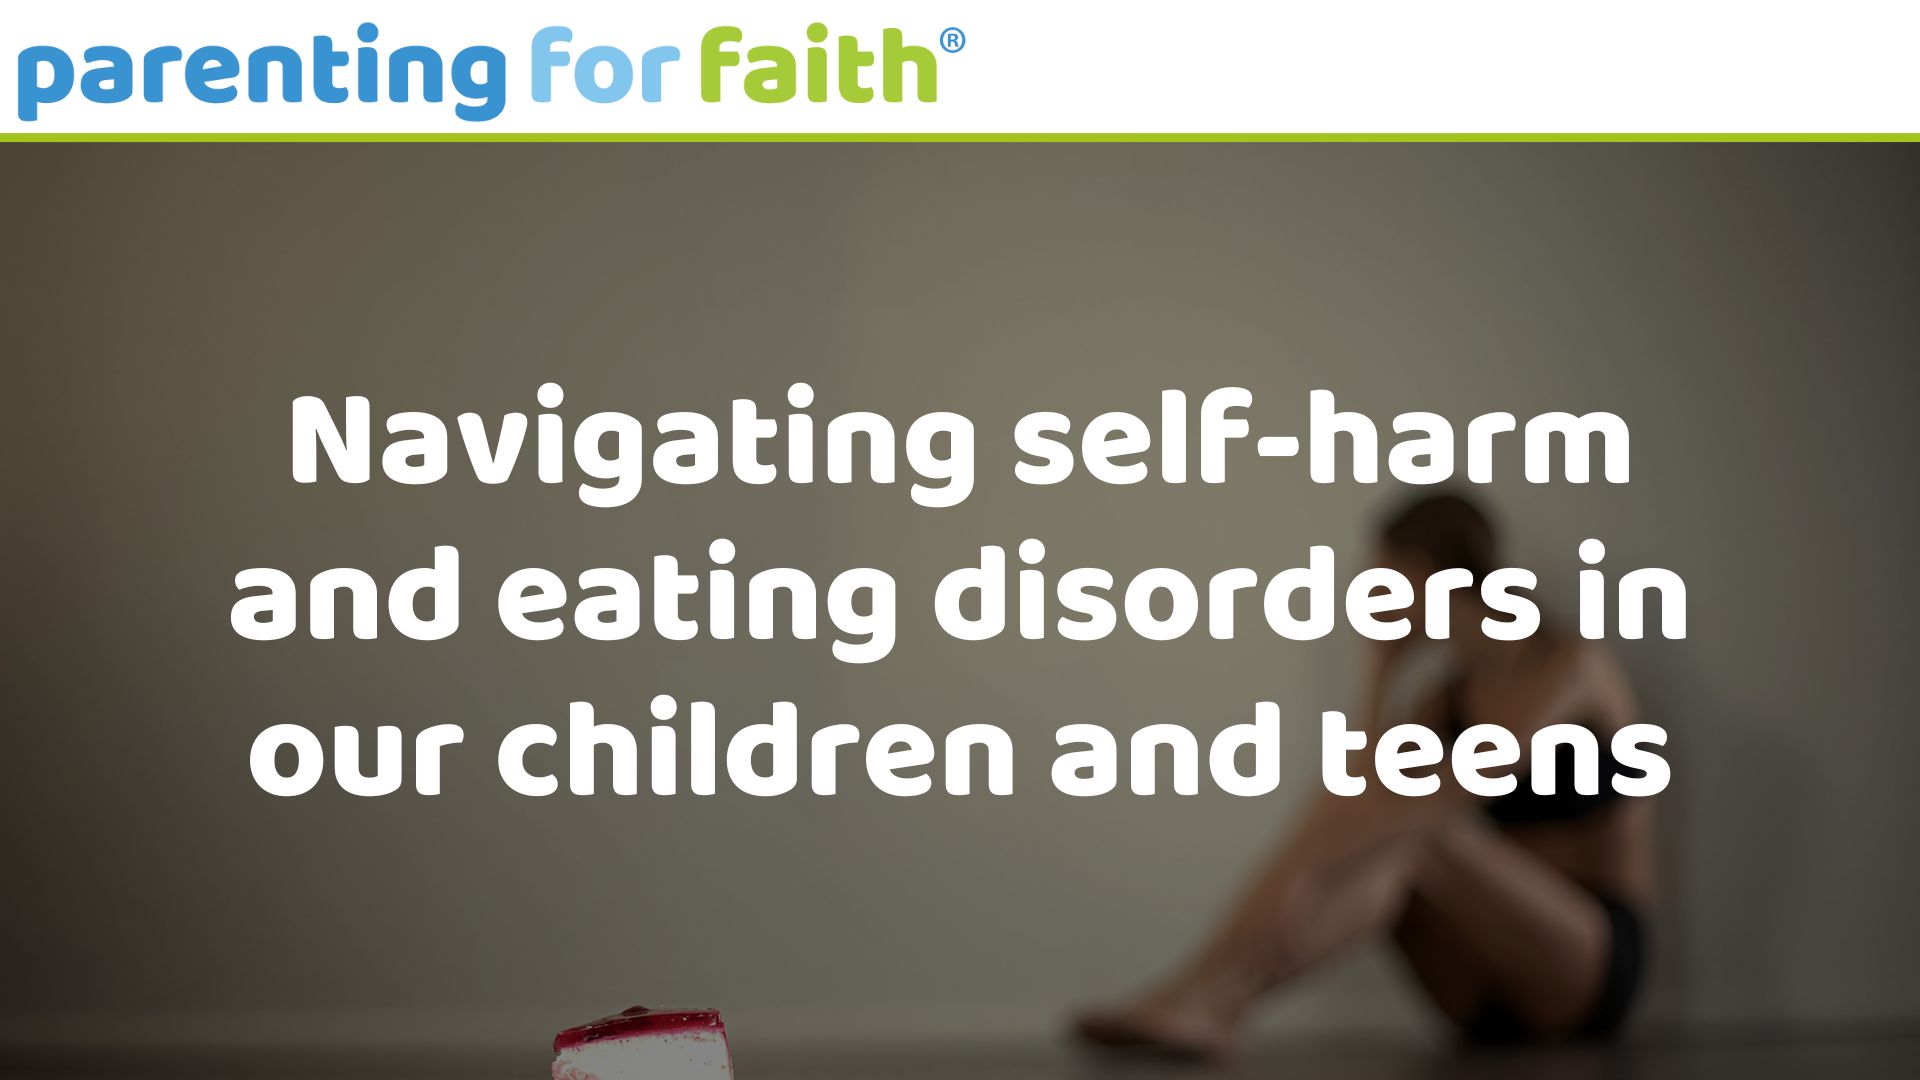 Navigating self harm and eating disorders in our children and teens image credit Motortion from Getty Images